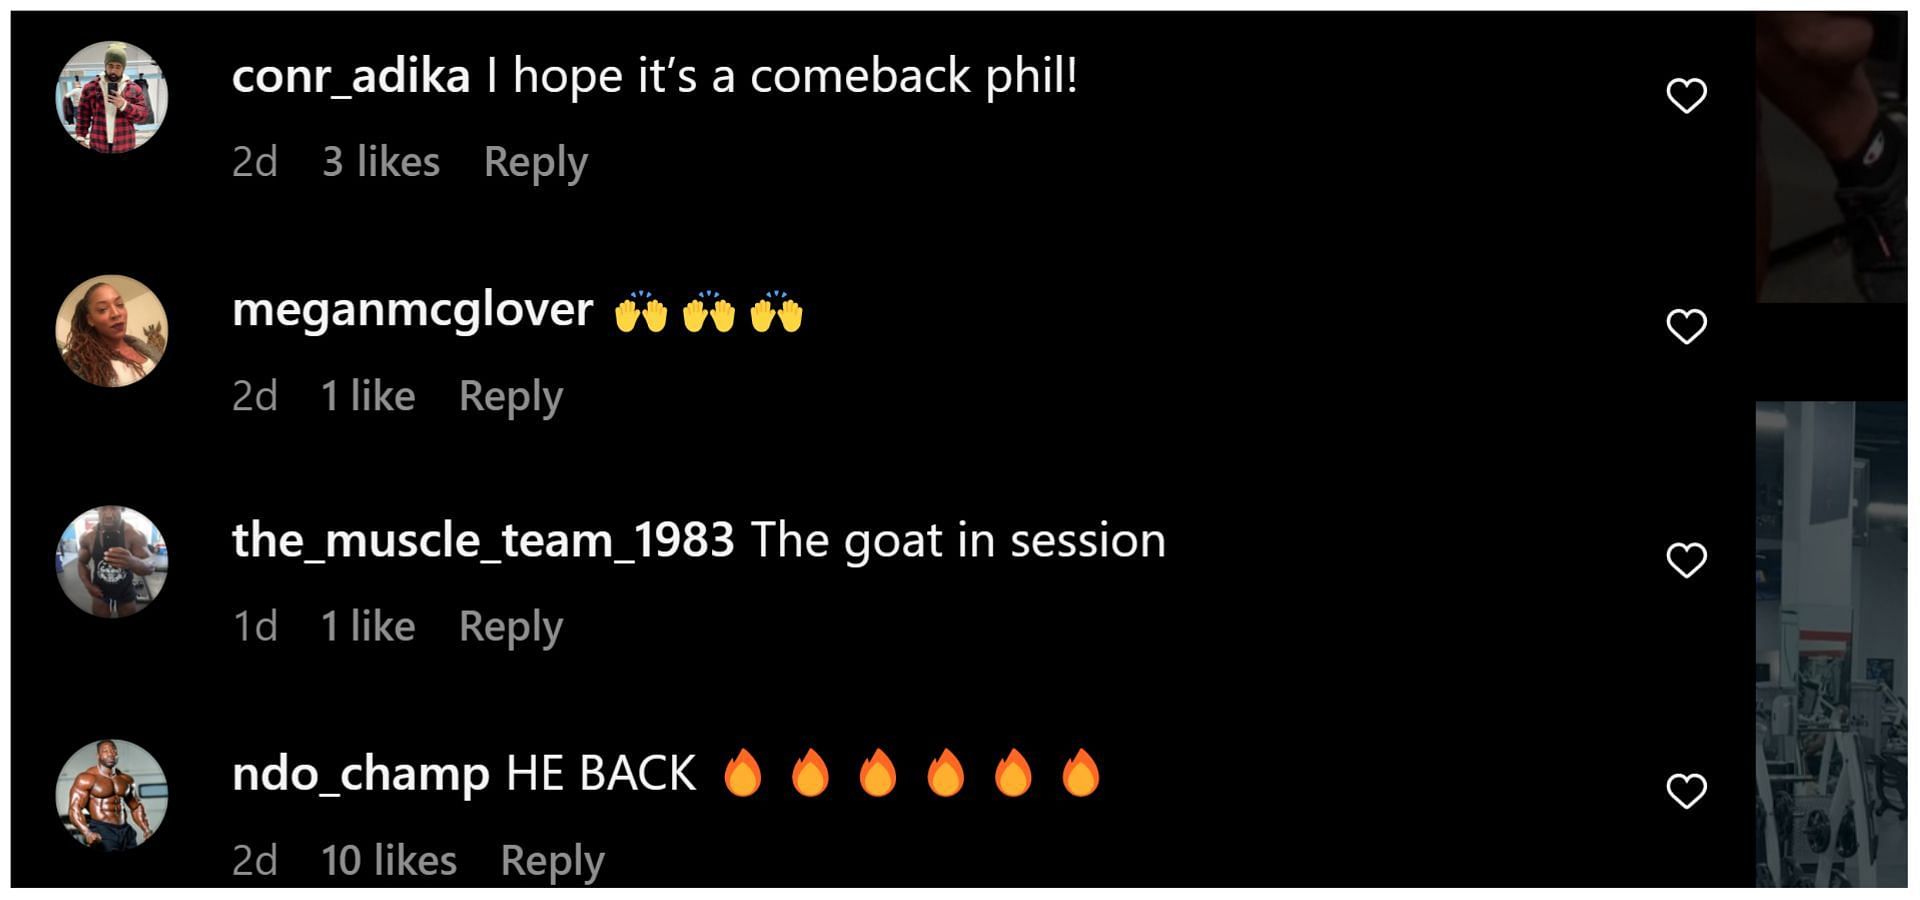 Phil Heath shares workout video on Instagram and fans rally in the comments section in hopes of a comeback : Image via Instagram (@philheath)